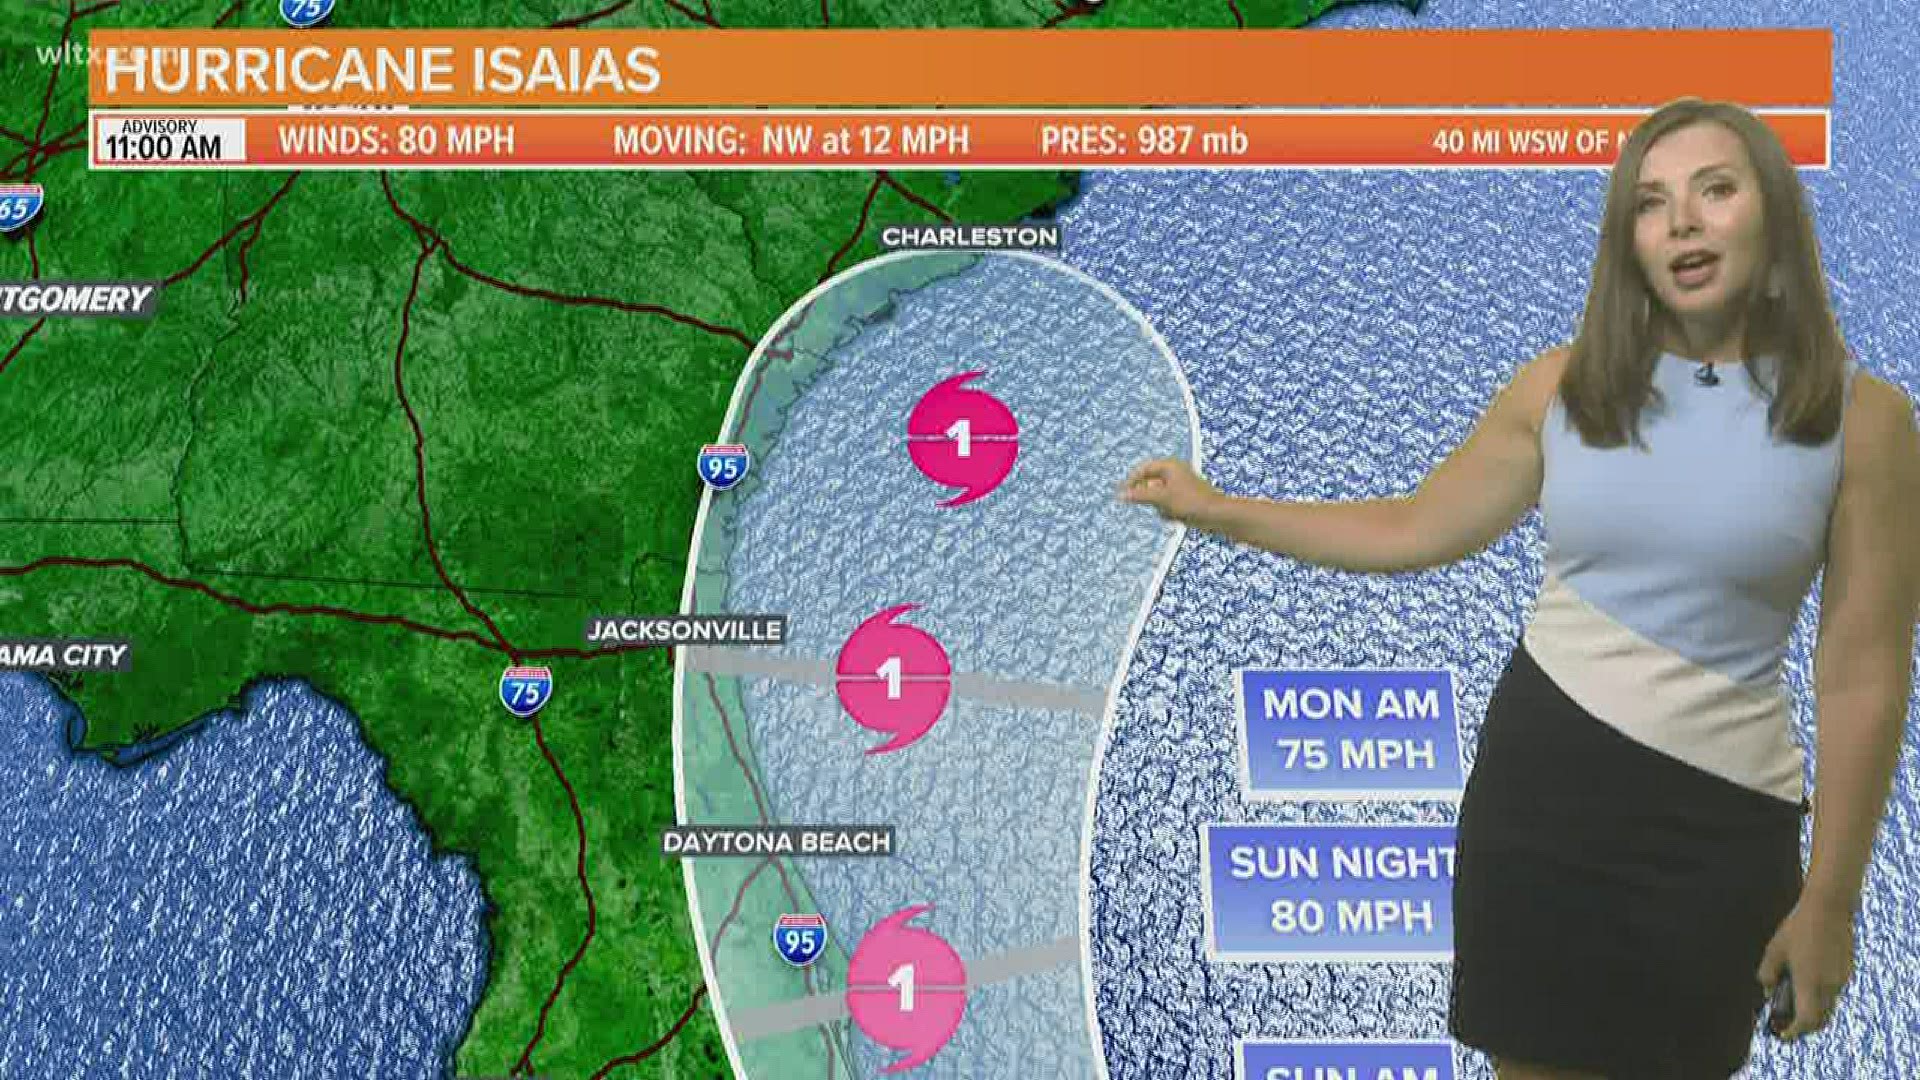 Hurricane Isaias is getting better organized as it slowly makes its way to the United States and eventually off the Carolinas coastline early next week.